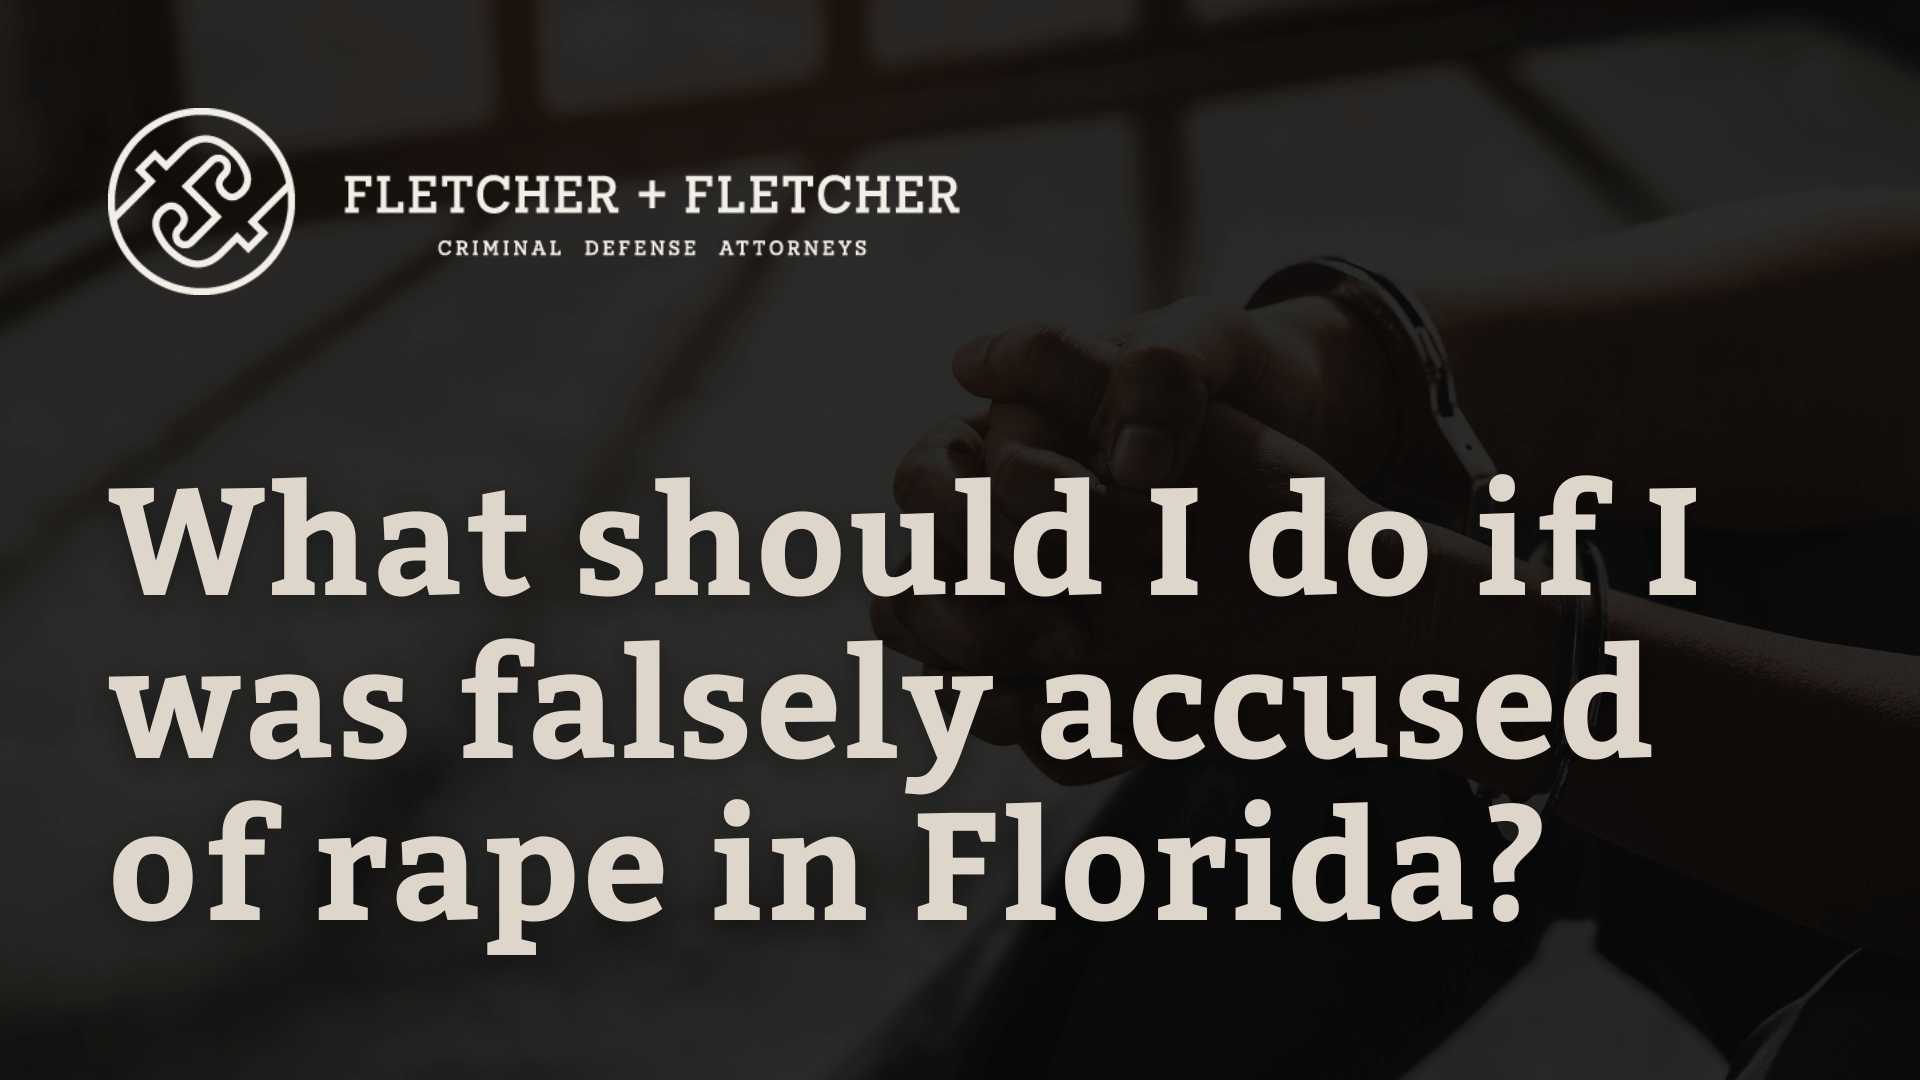 What should I do if I was falsely accused of rape in Florida - Fletcher Fletcher st petersburg florida criminal defense lawyers